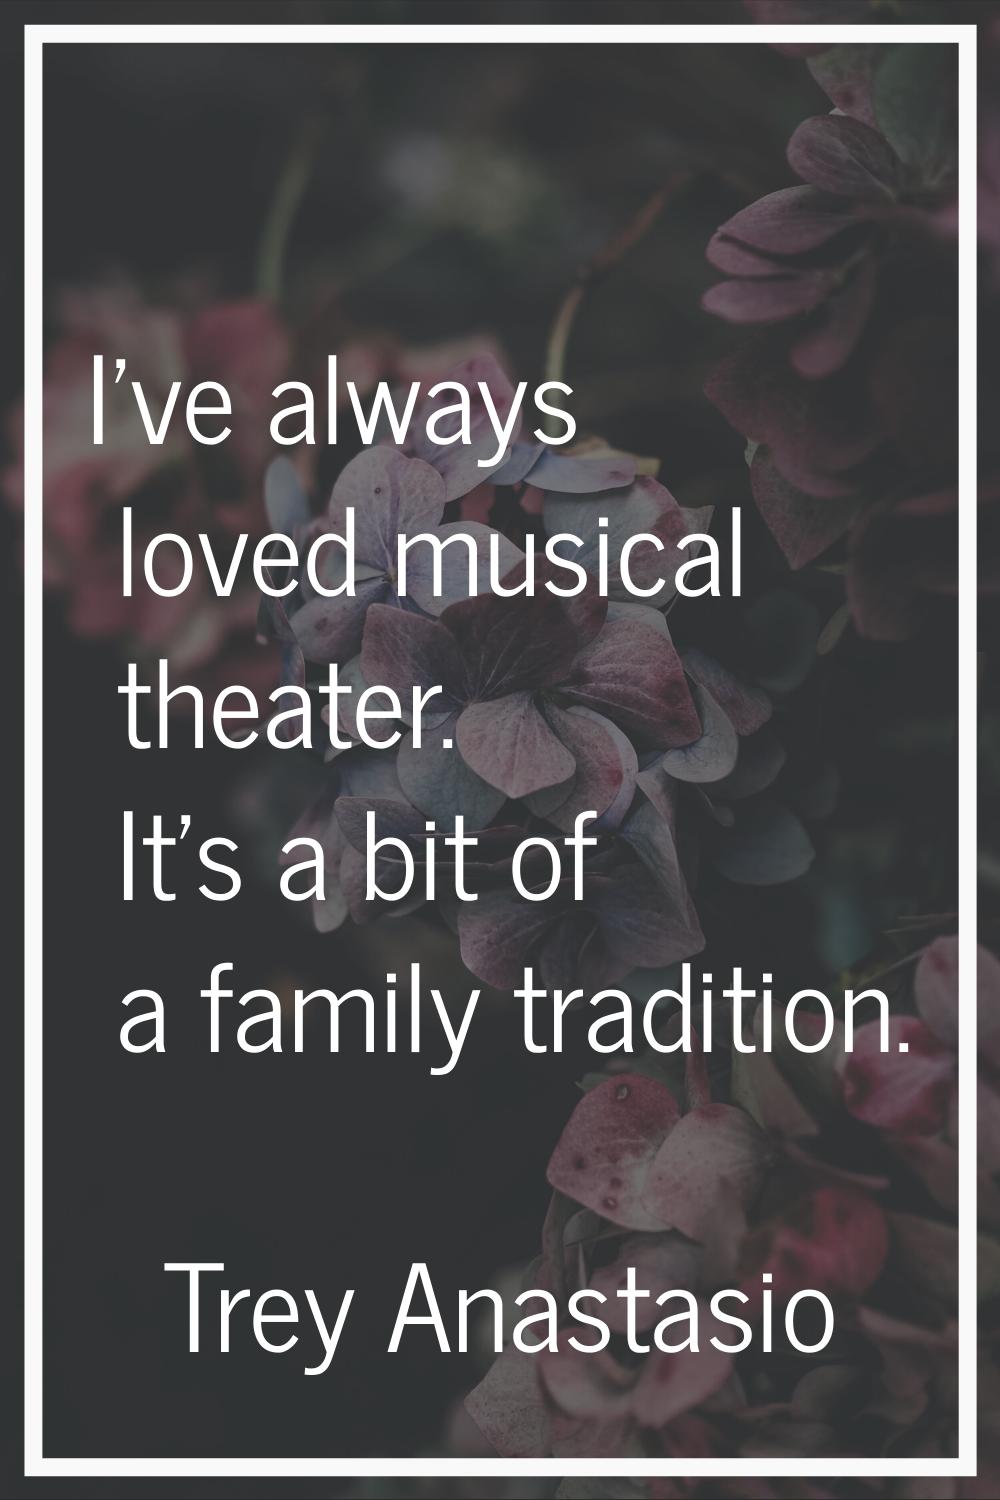 I've always loved musical theater. It's a bit of a family tradition.